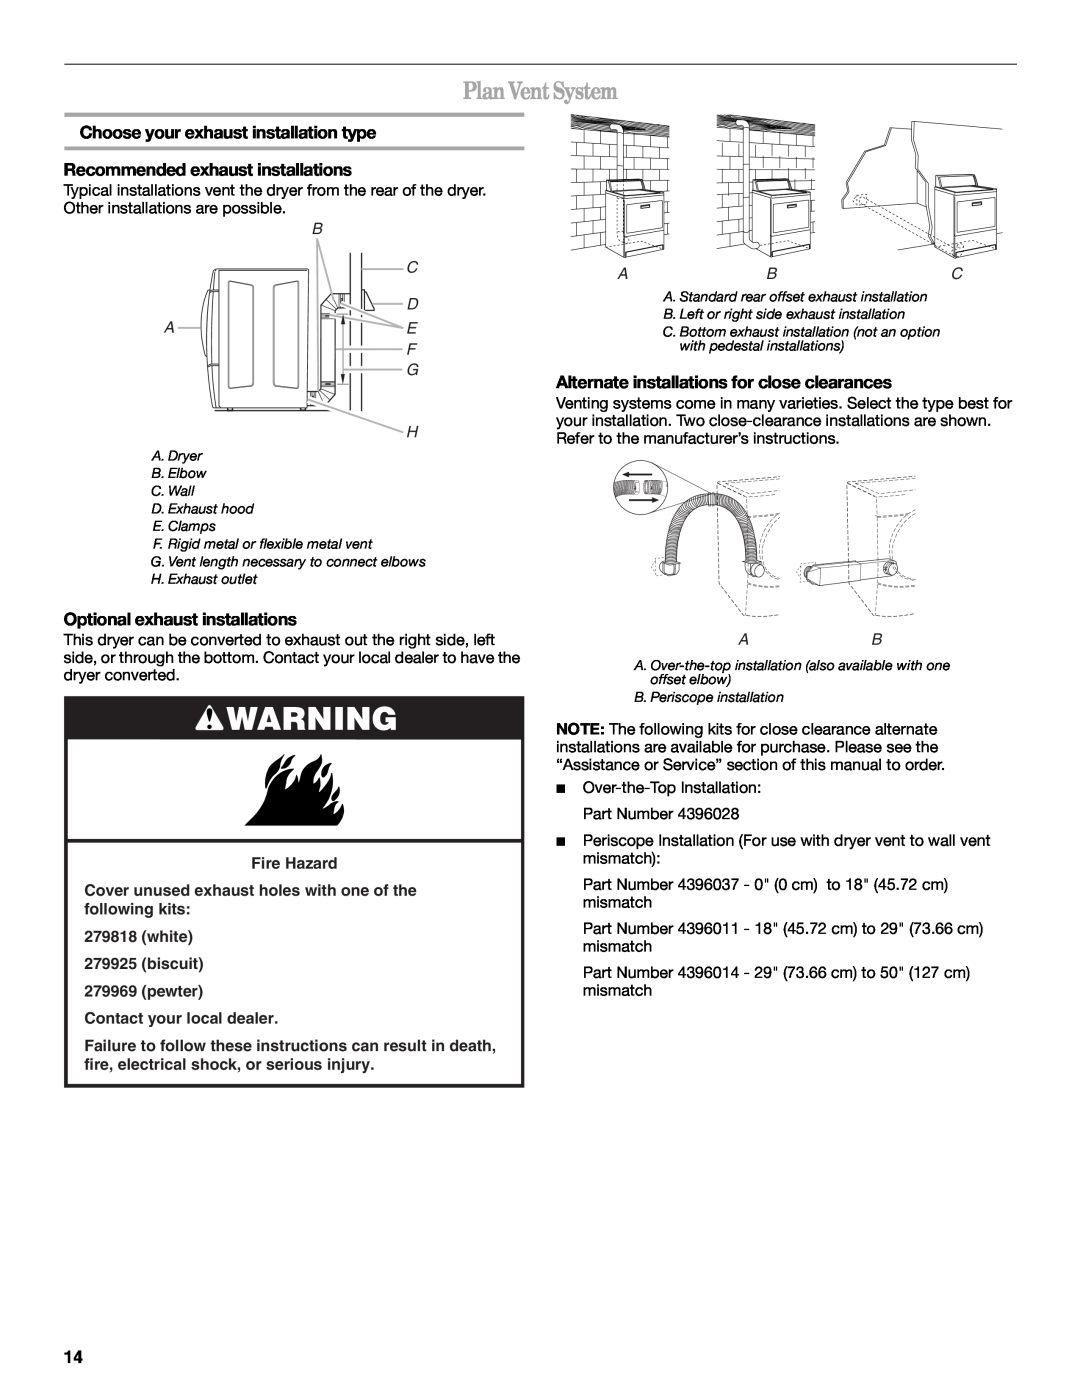 Whirlpool GEW9260PL1 manual Plan Vent System, Choose your exhaust installation type, Recommended exhaust installations 